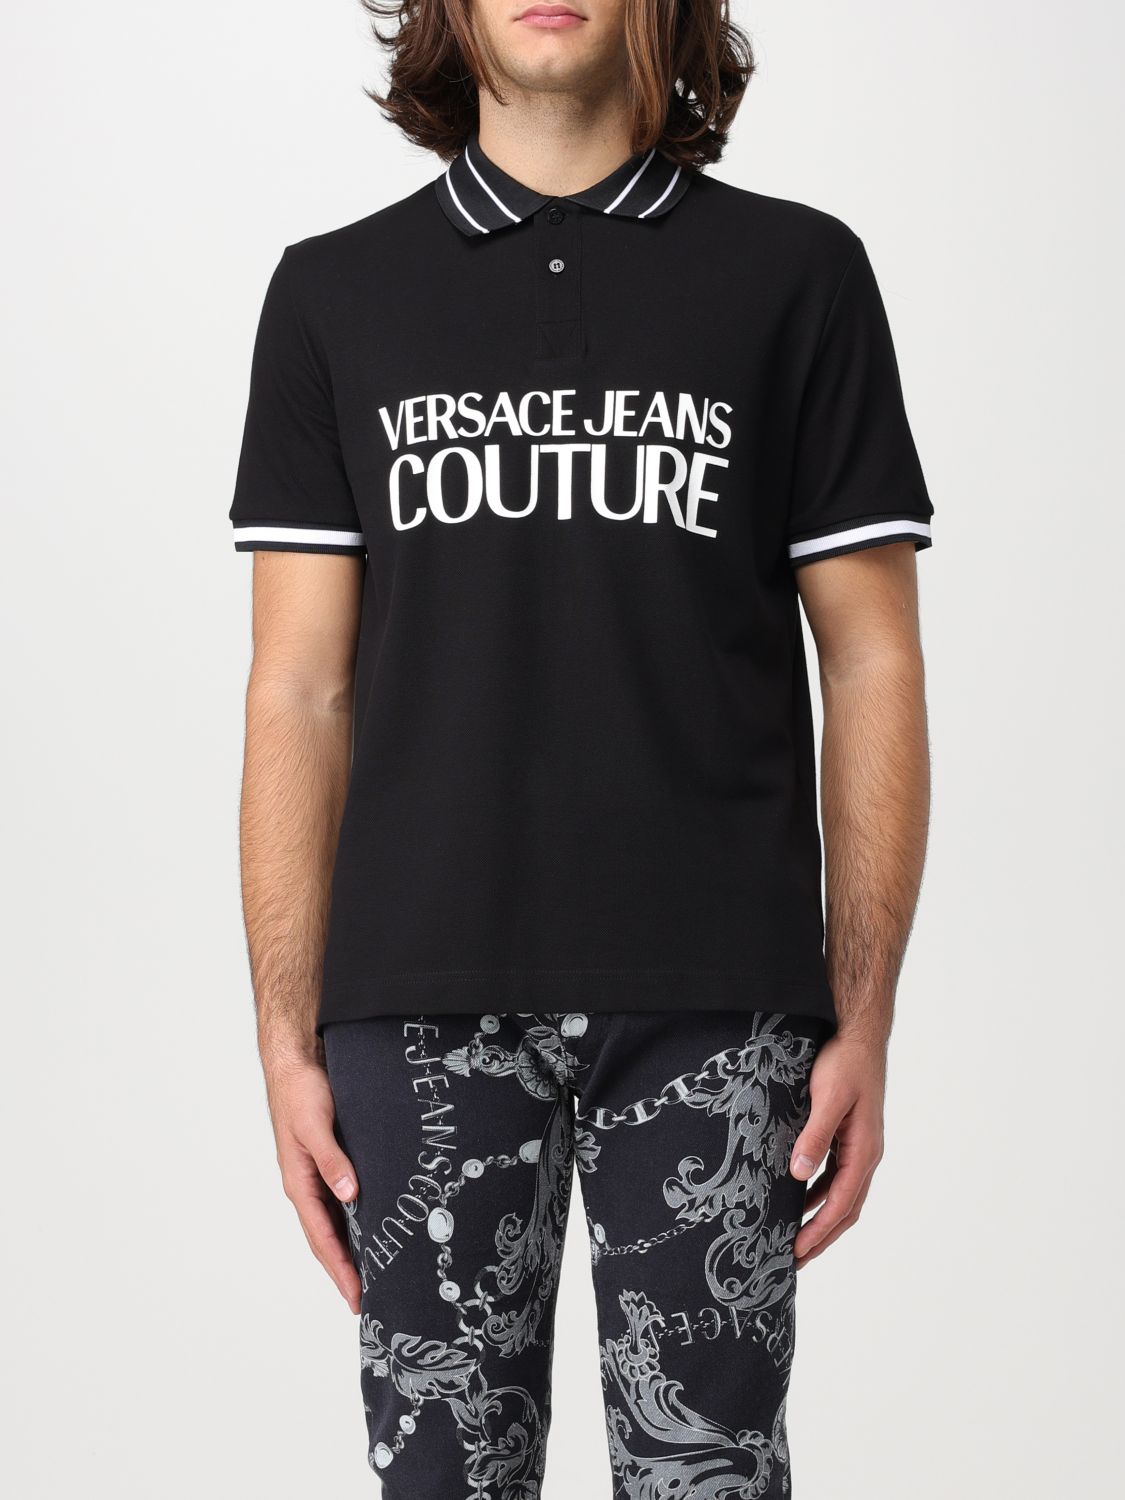 POLO衫 VERSACE JEANS COUTURE 男士 颜色 黑色